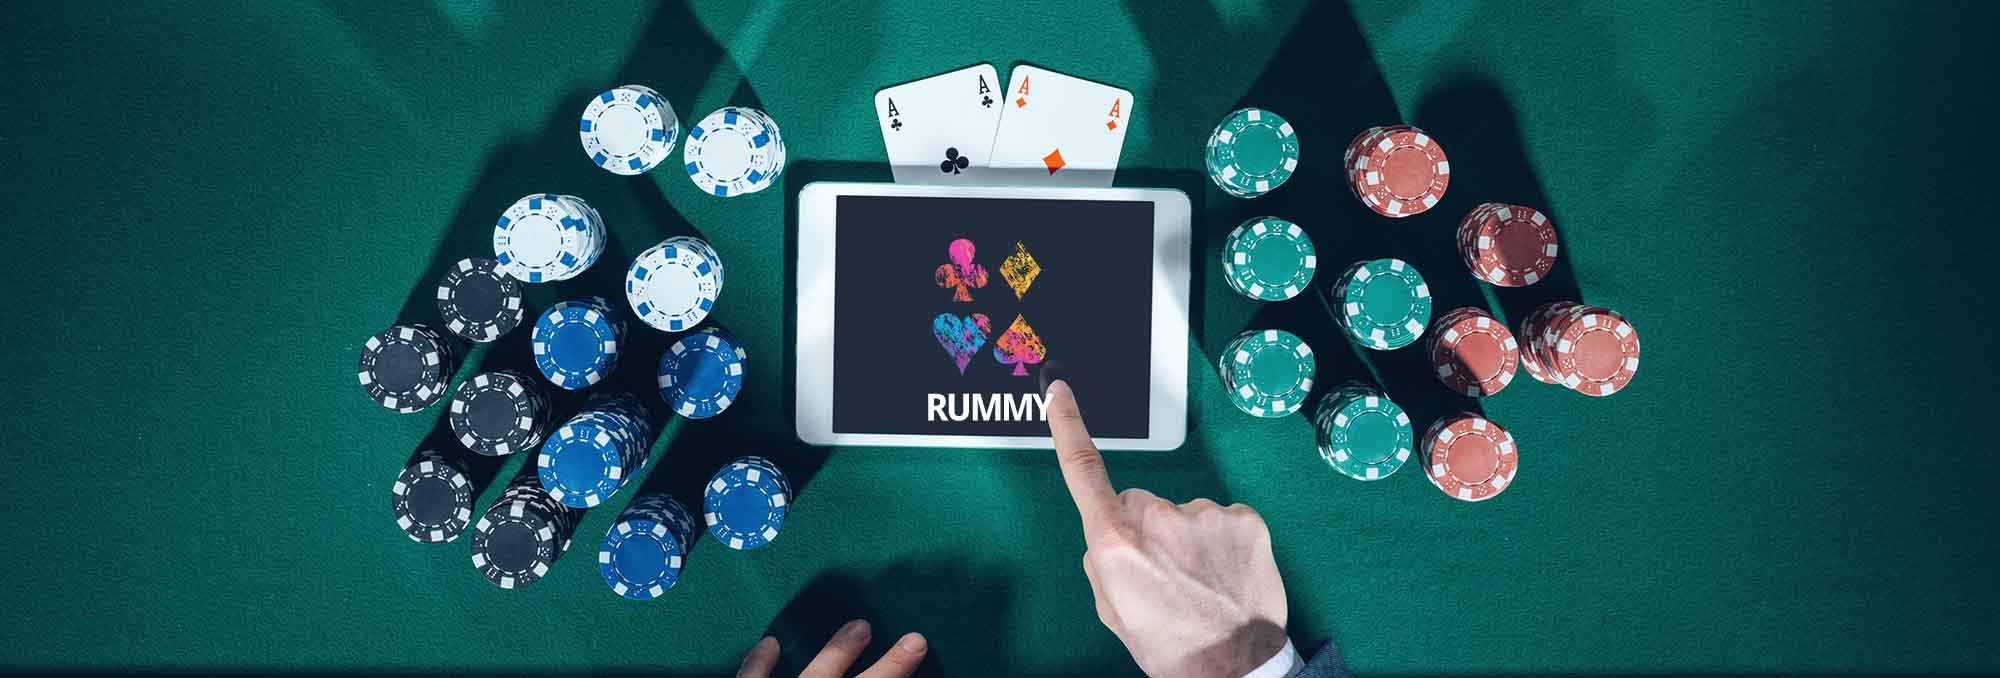 Rummy online with friends